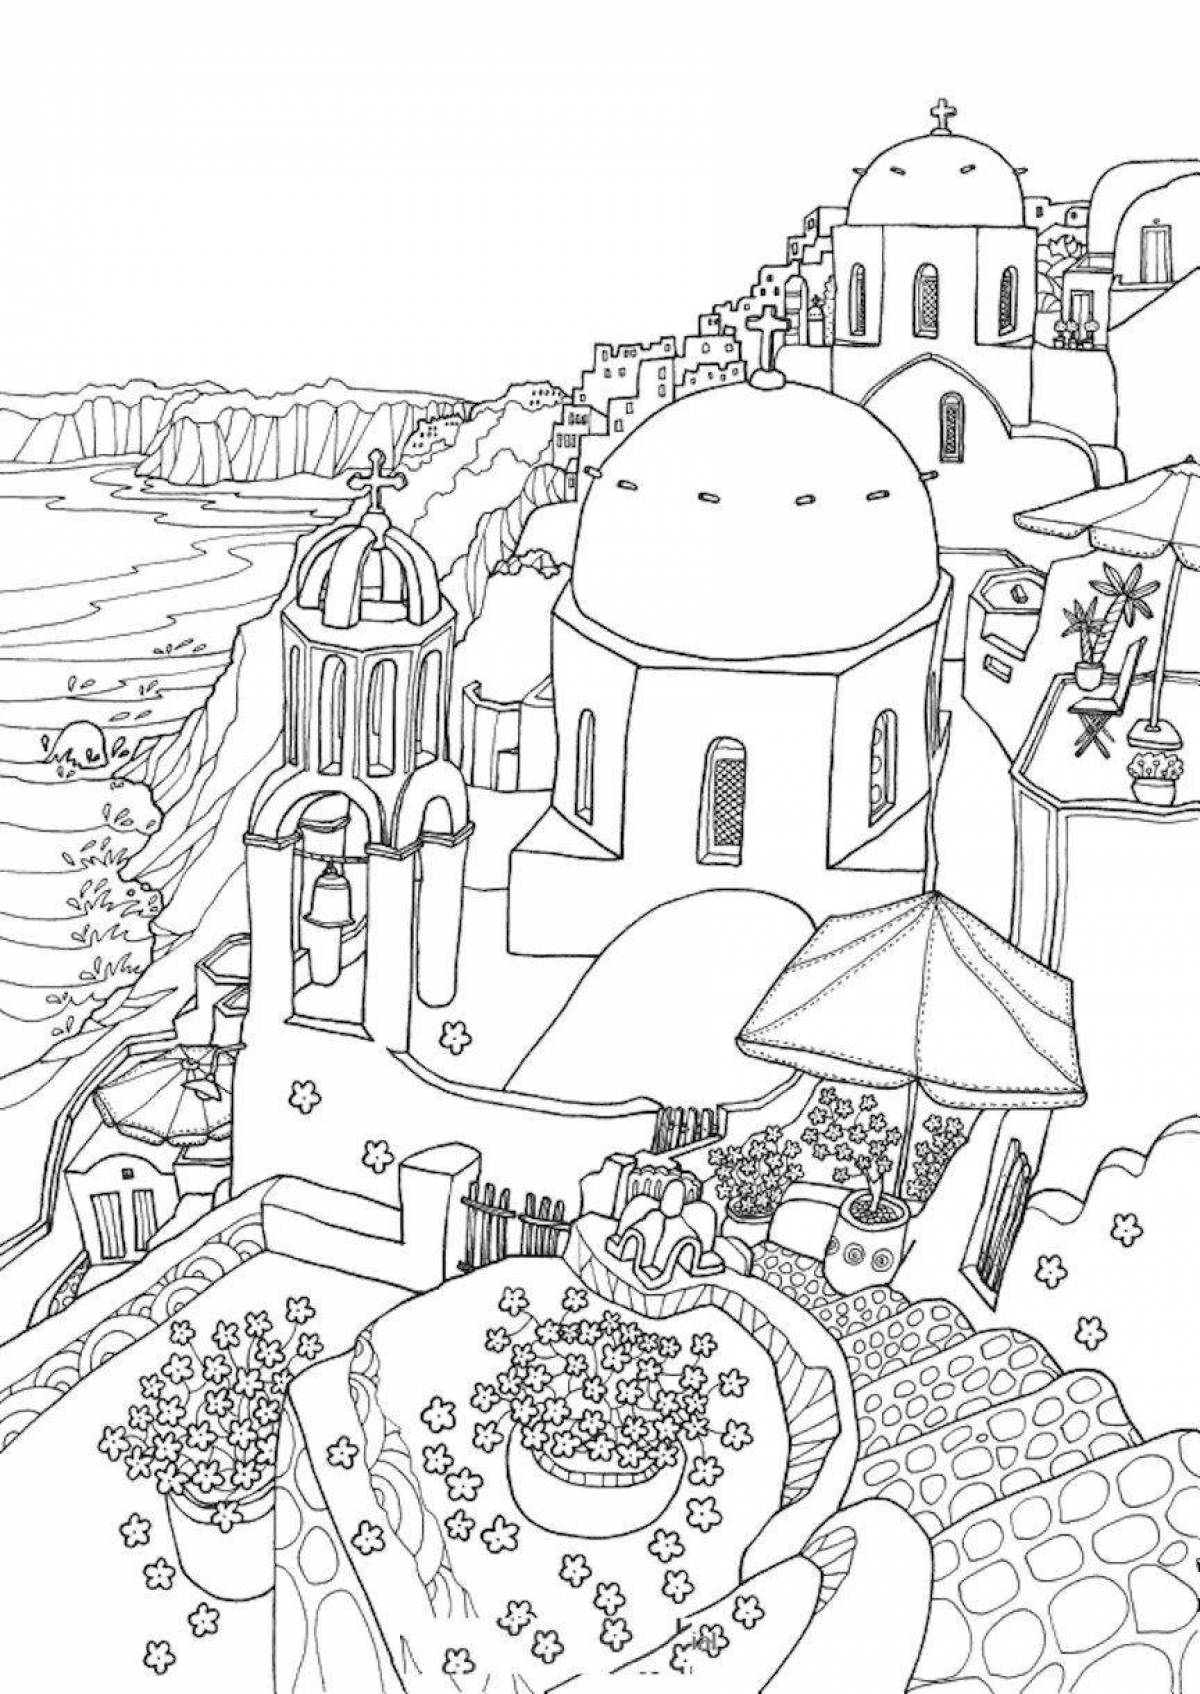 Ancient greece spectacular coloring book for kids